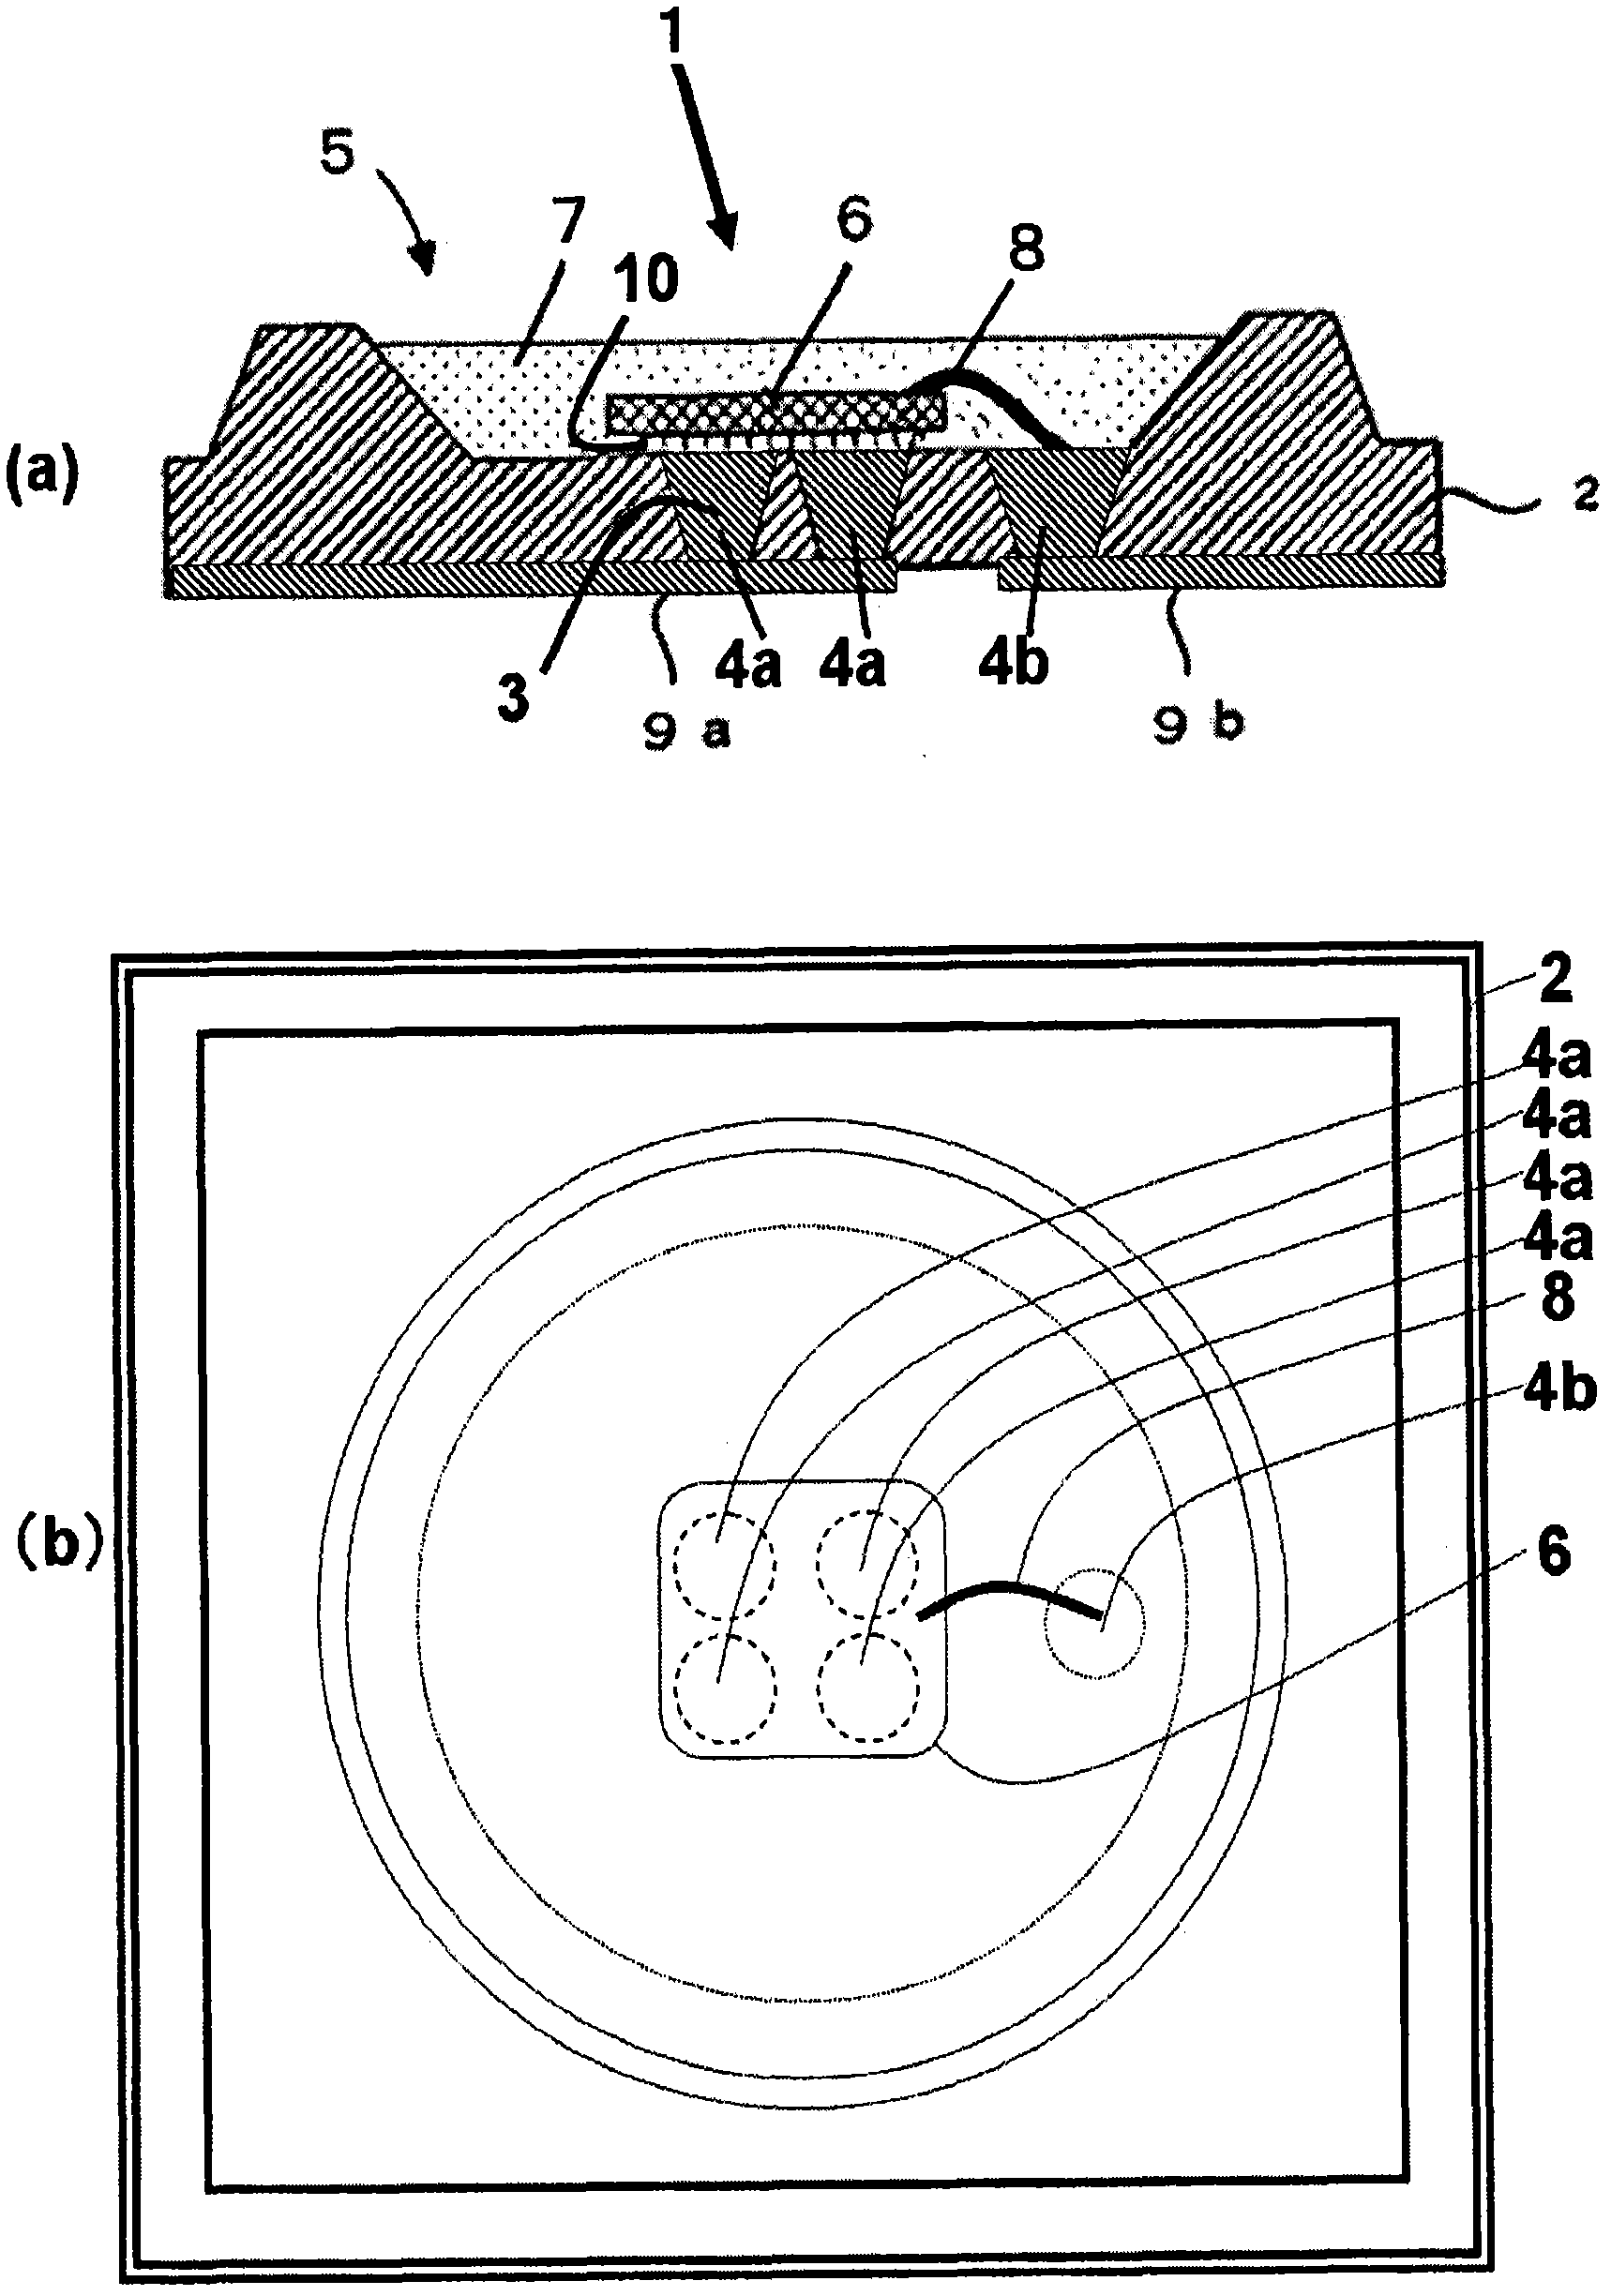 Luminescent device and method of manufacturing the same